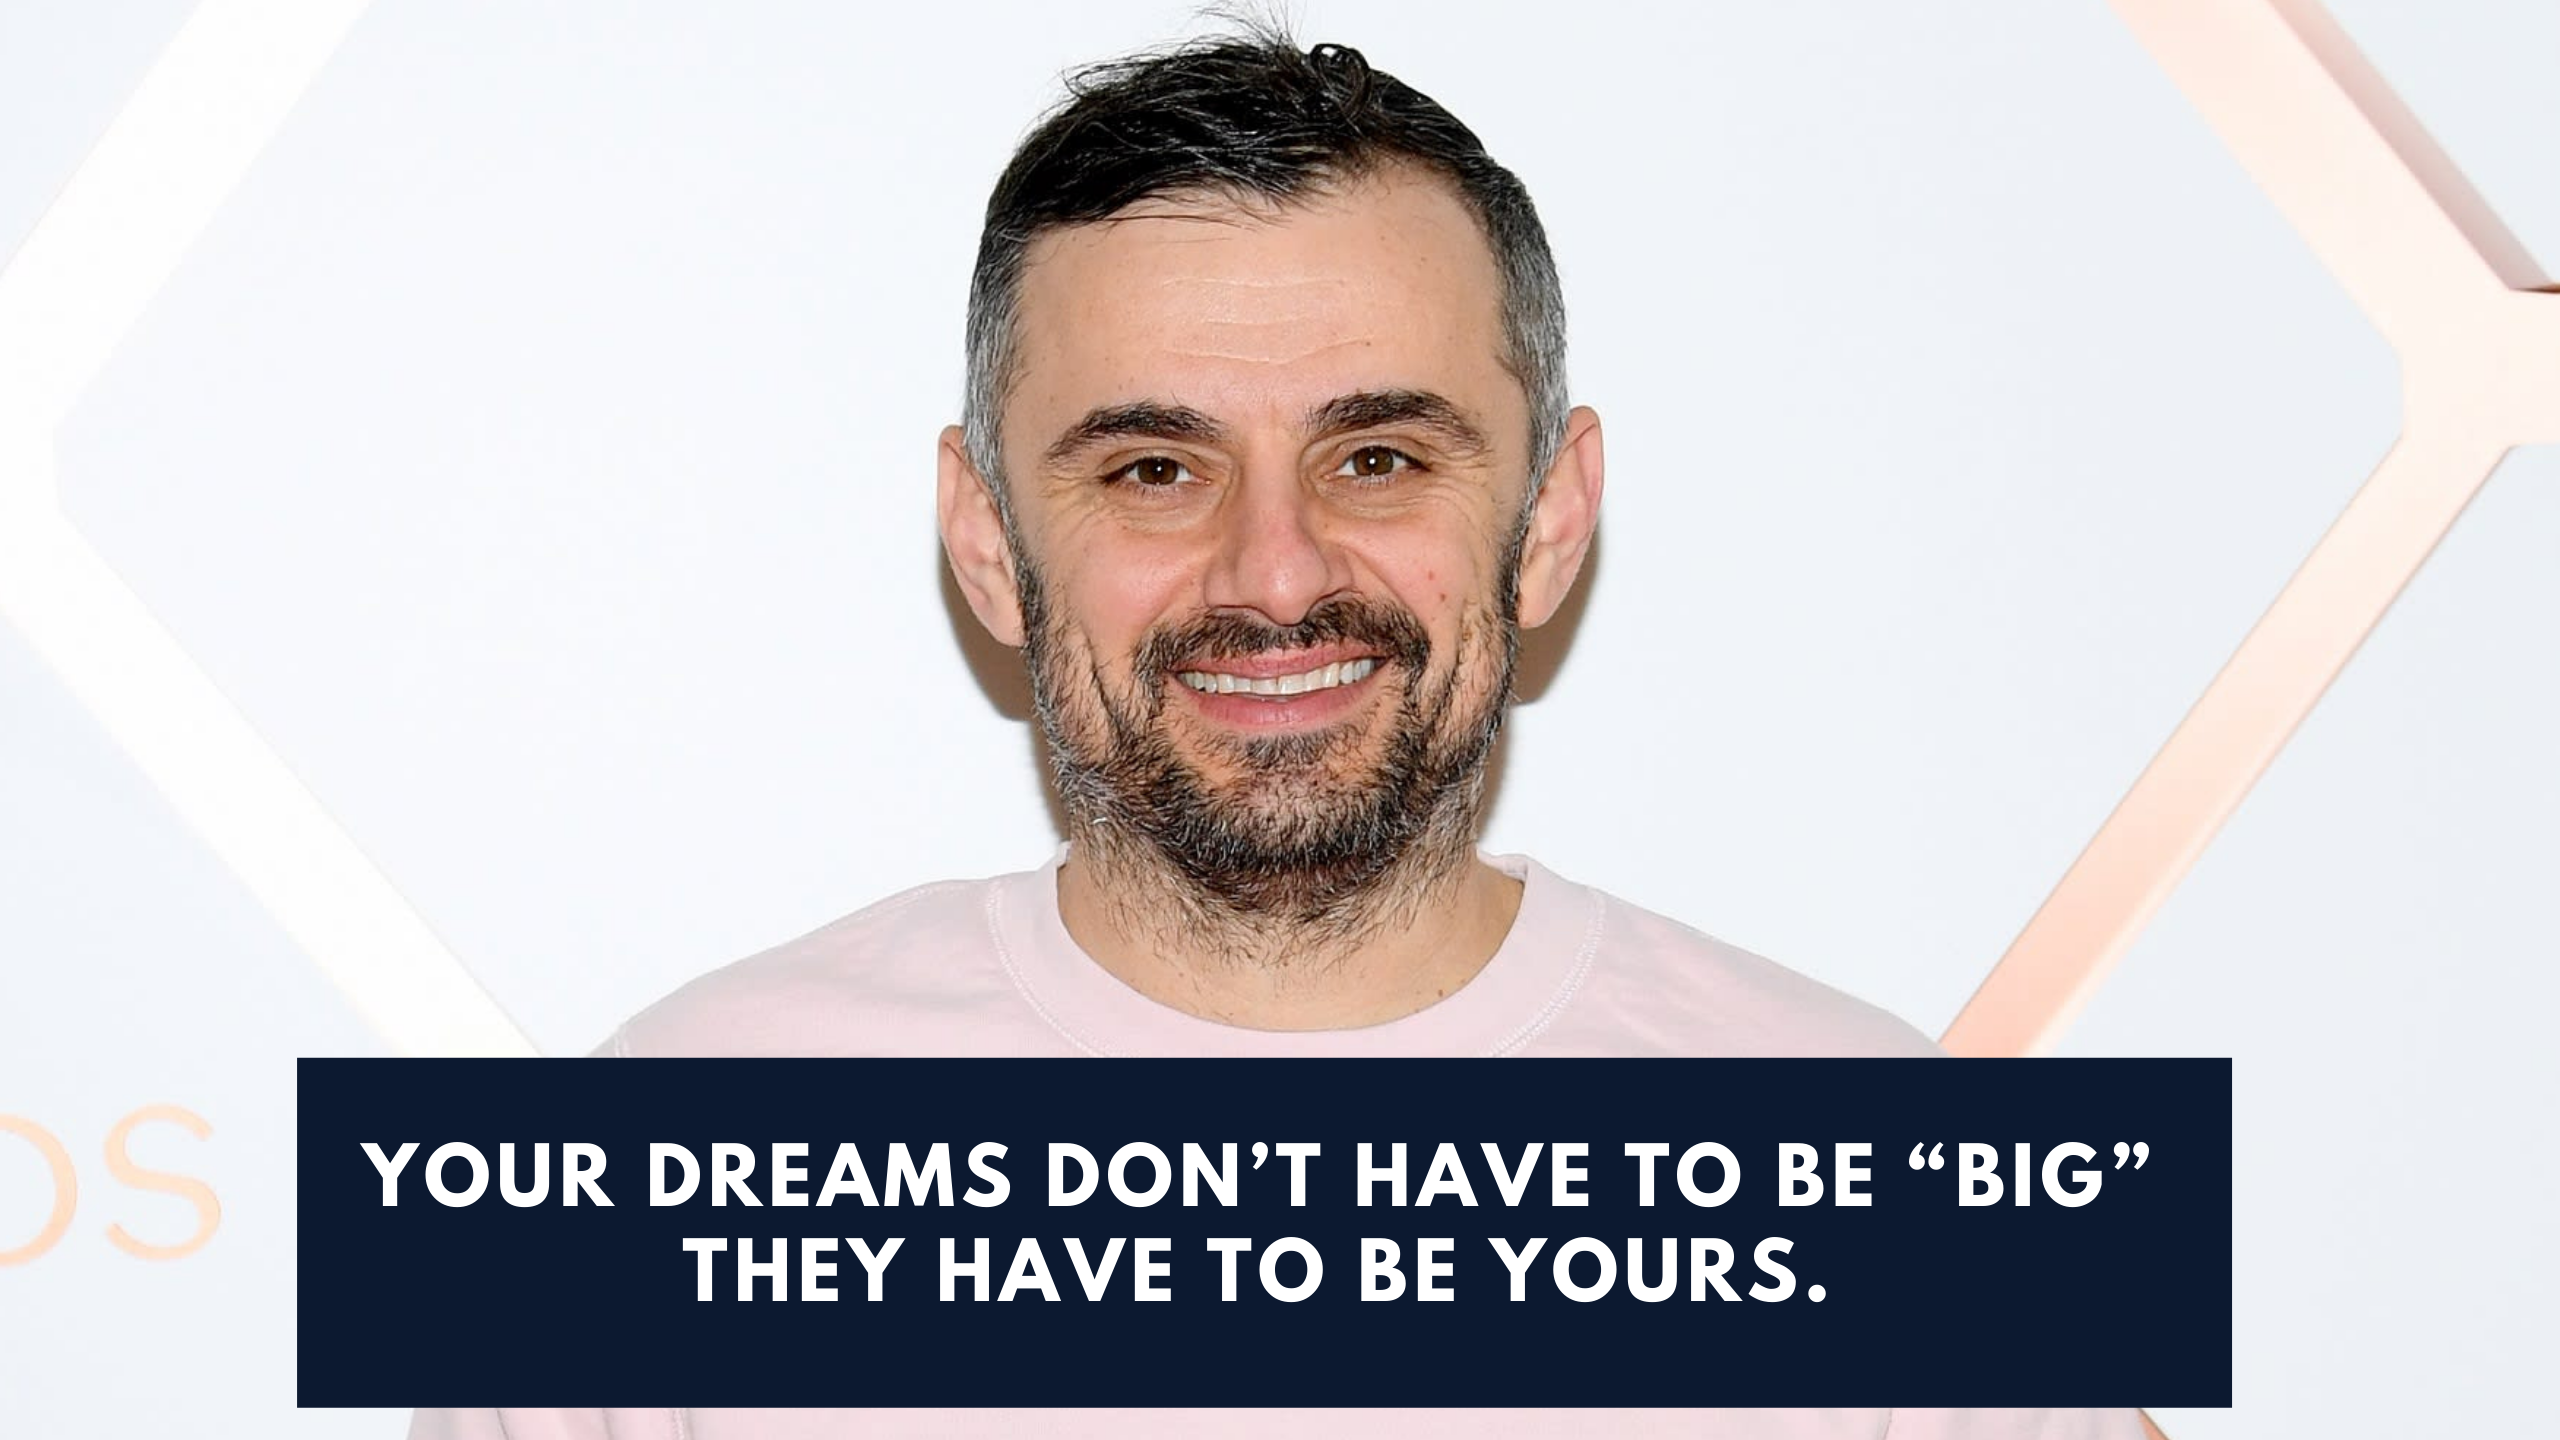 Gary Vee Motivational Quotes